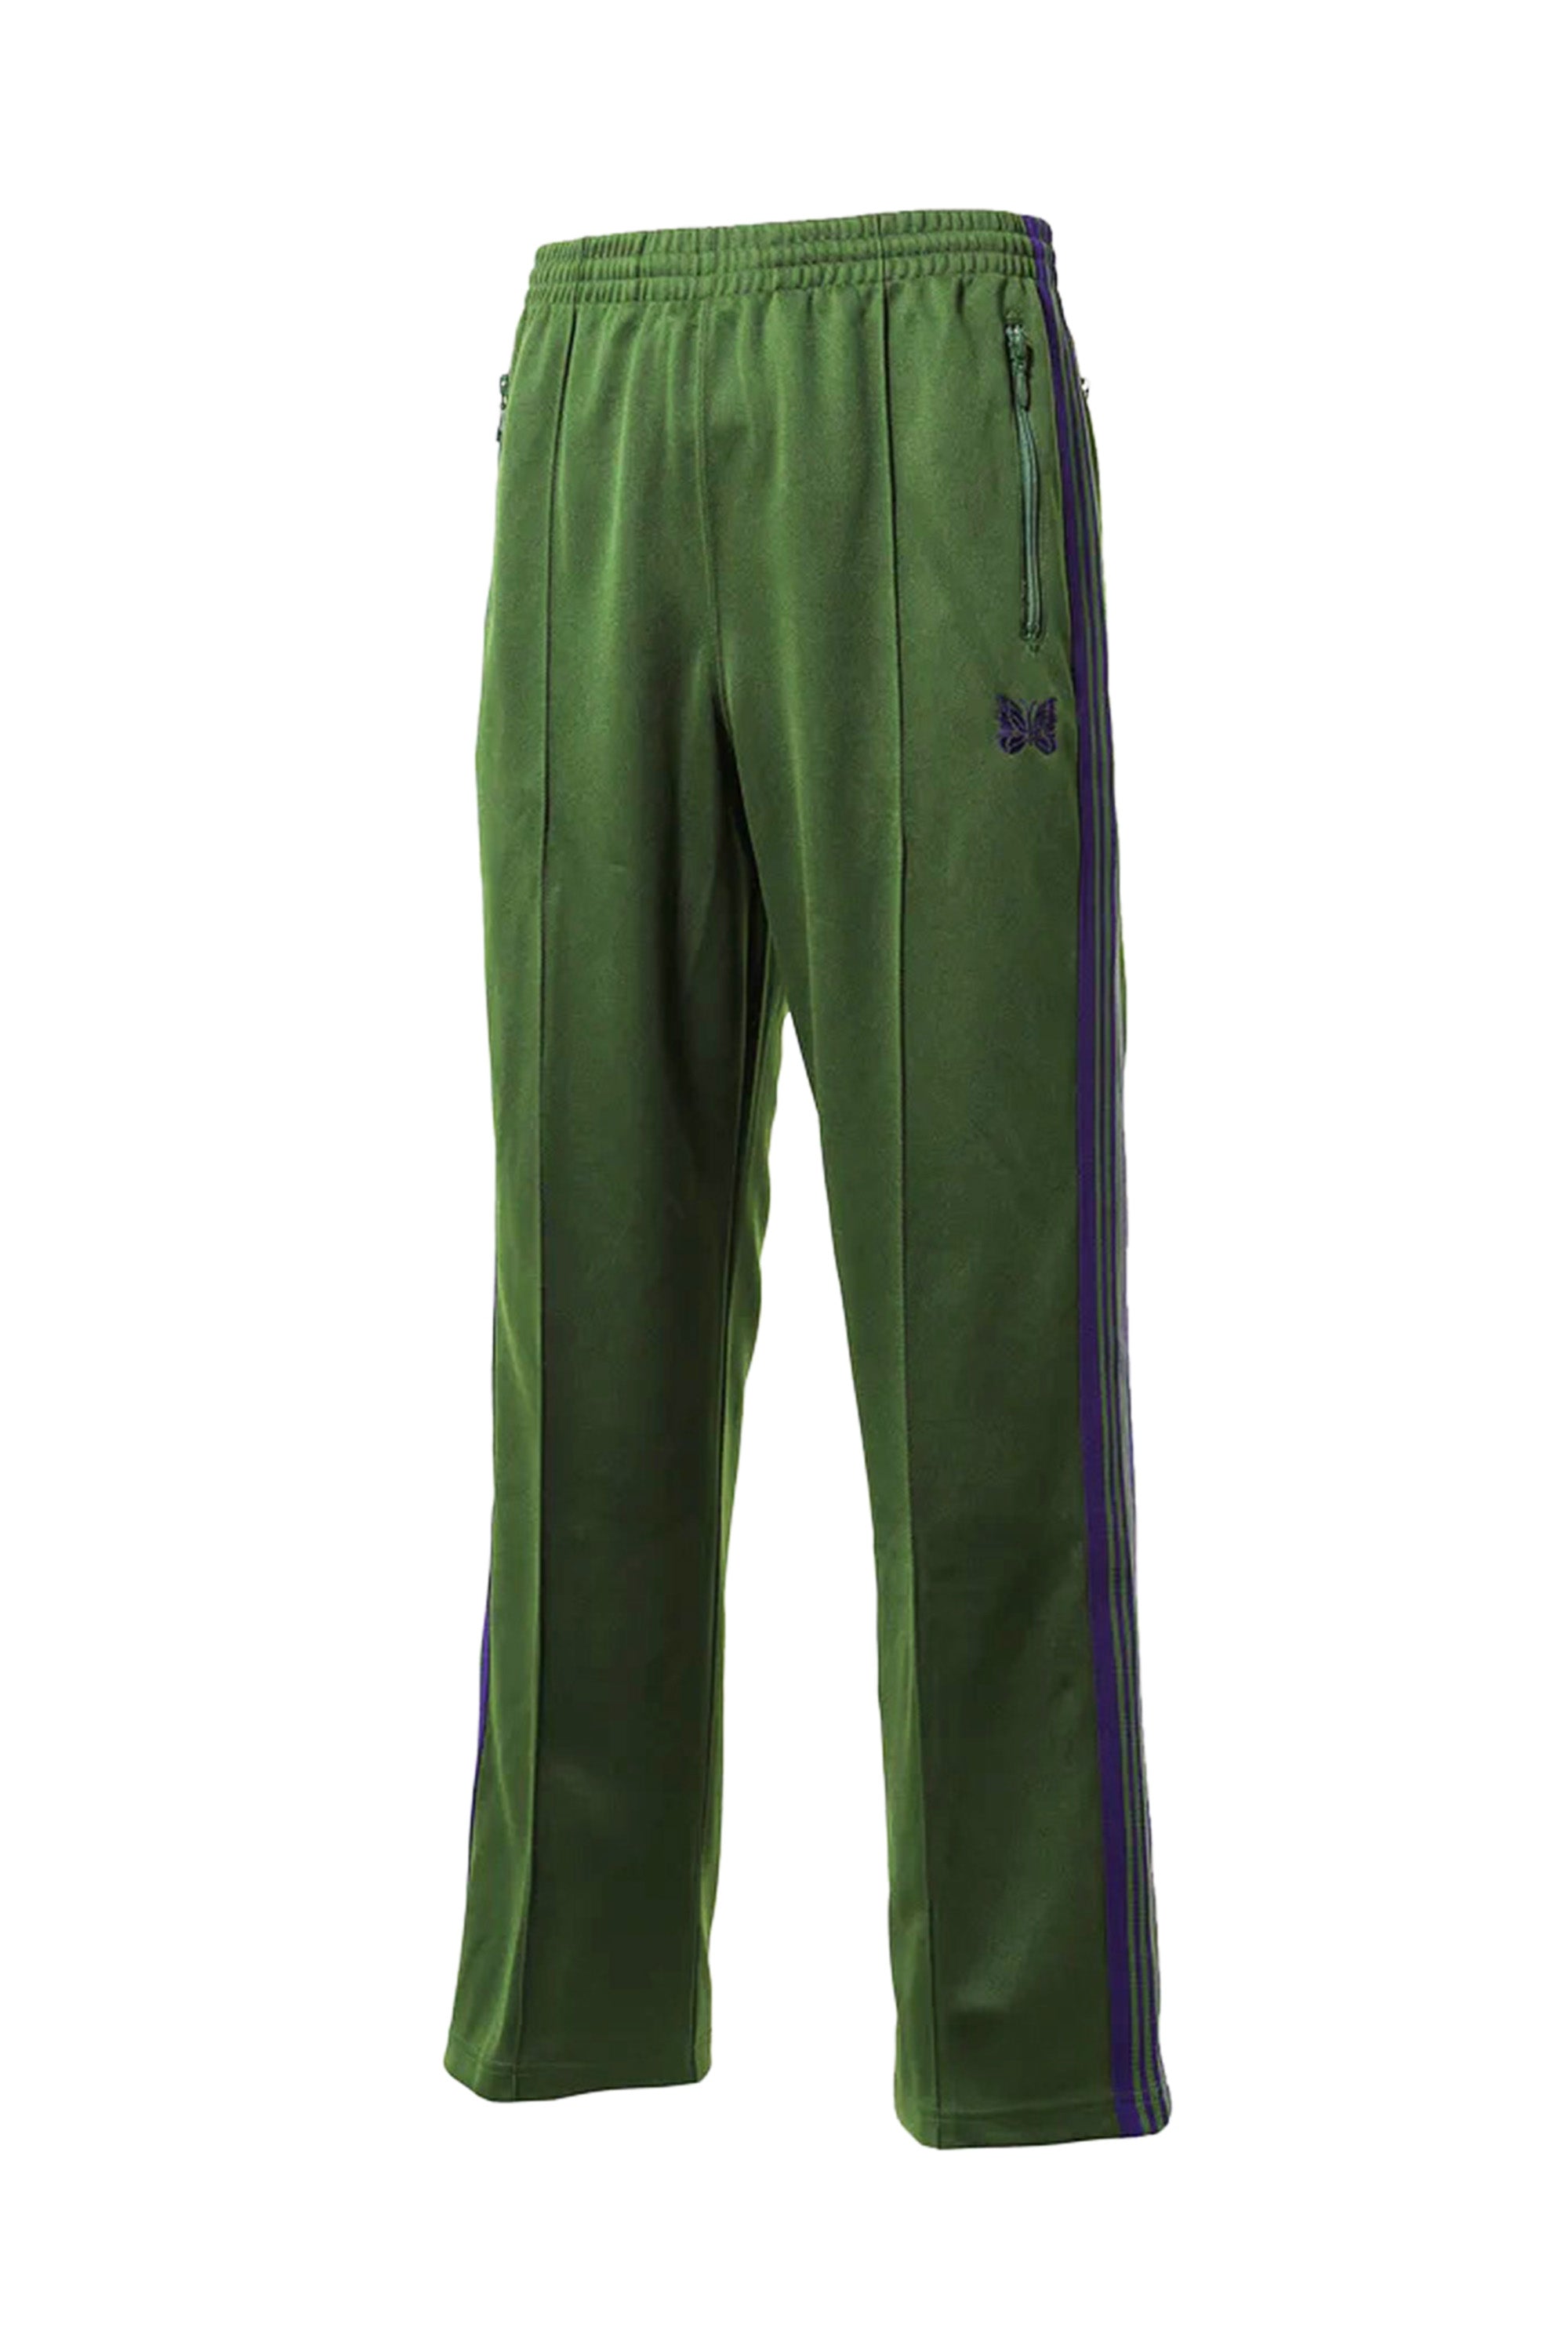 Needles FW23 TRACK PANT - POLY SMOOTH / IVY GRN